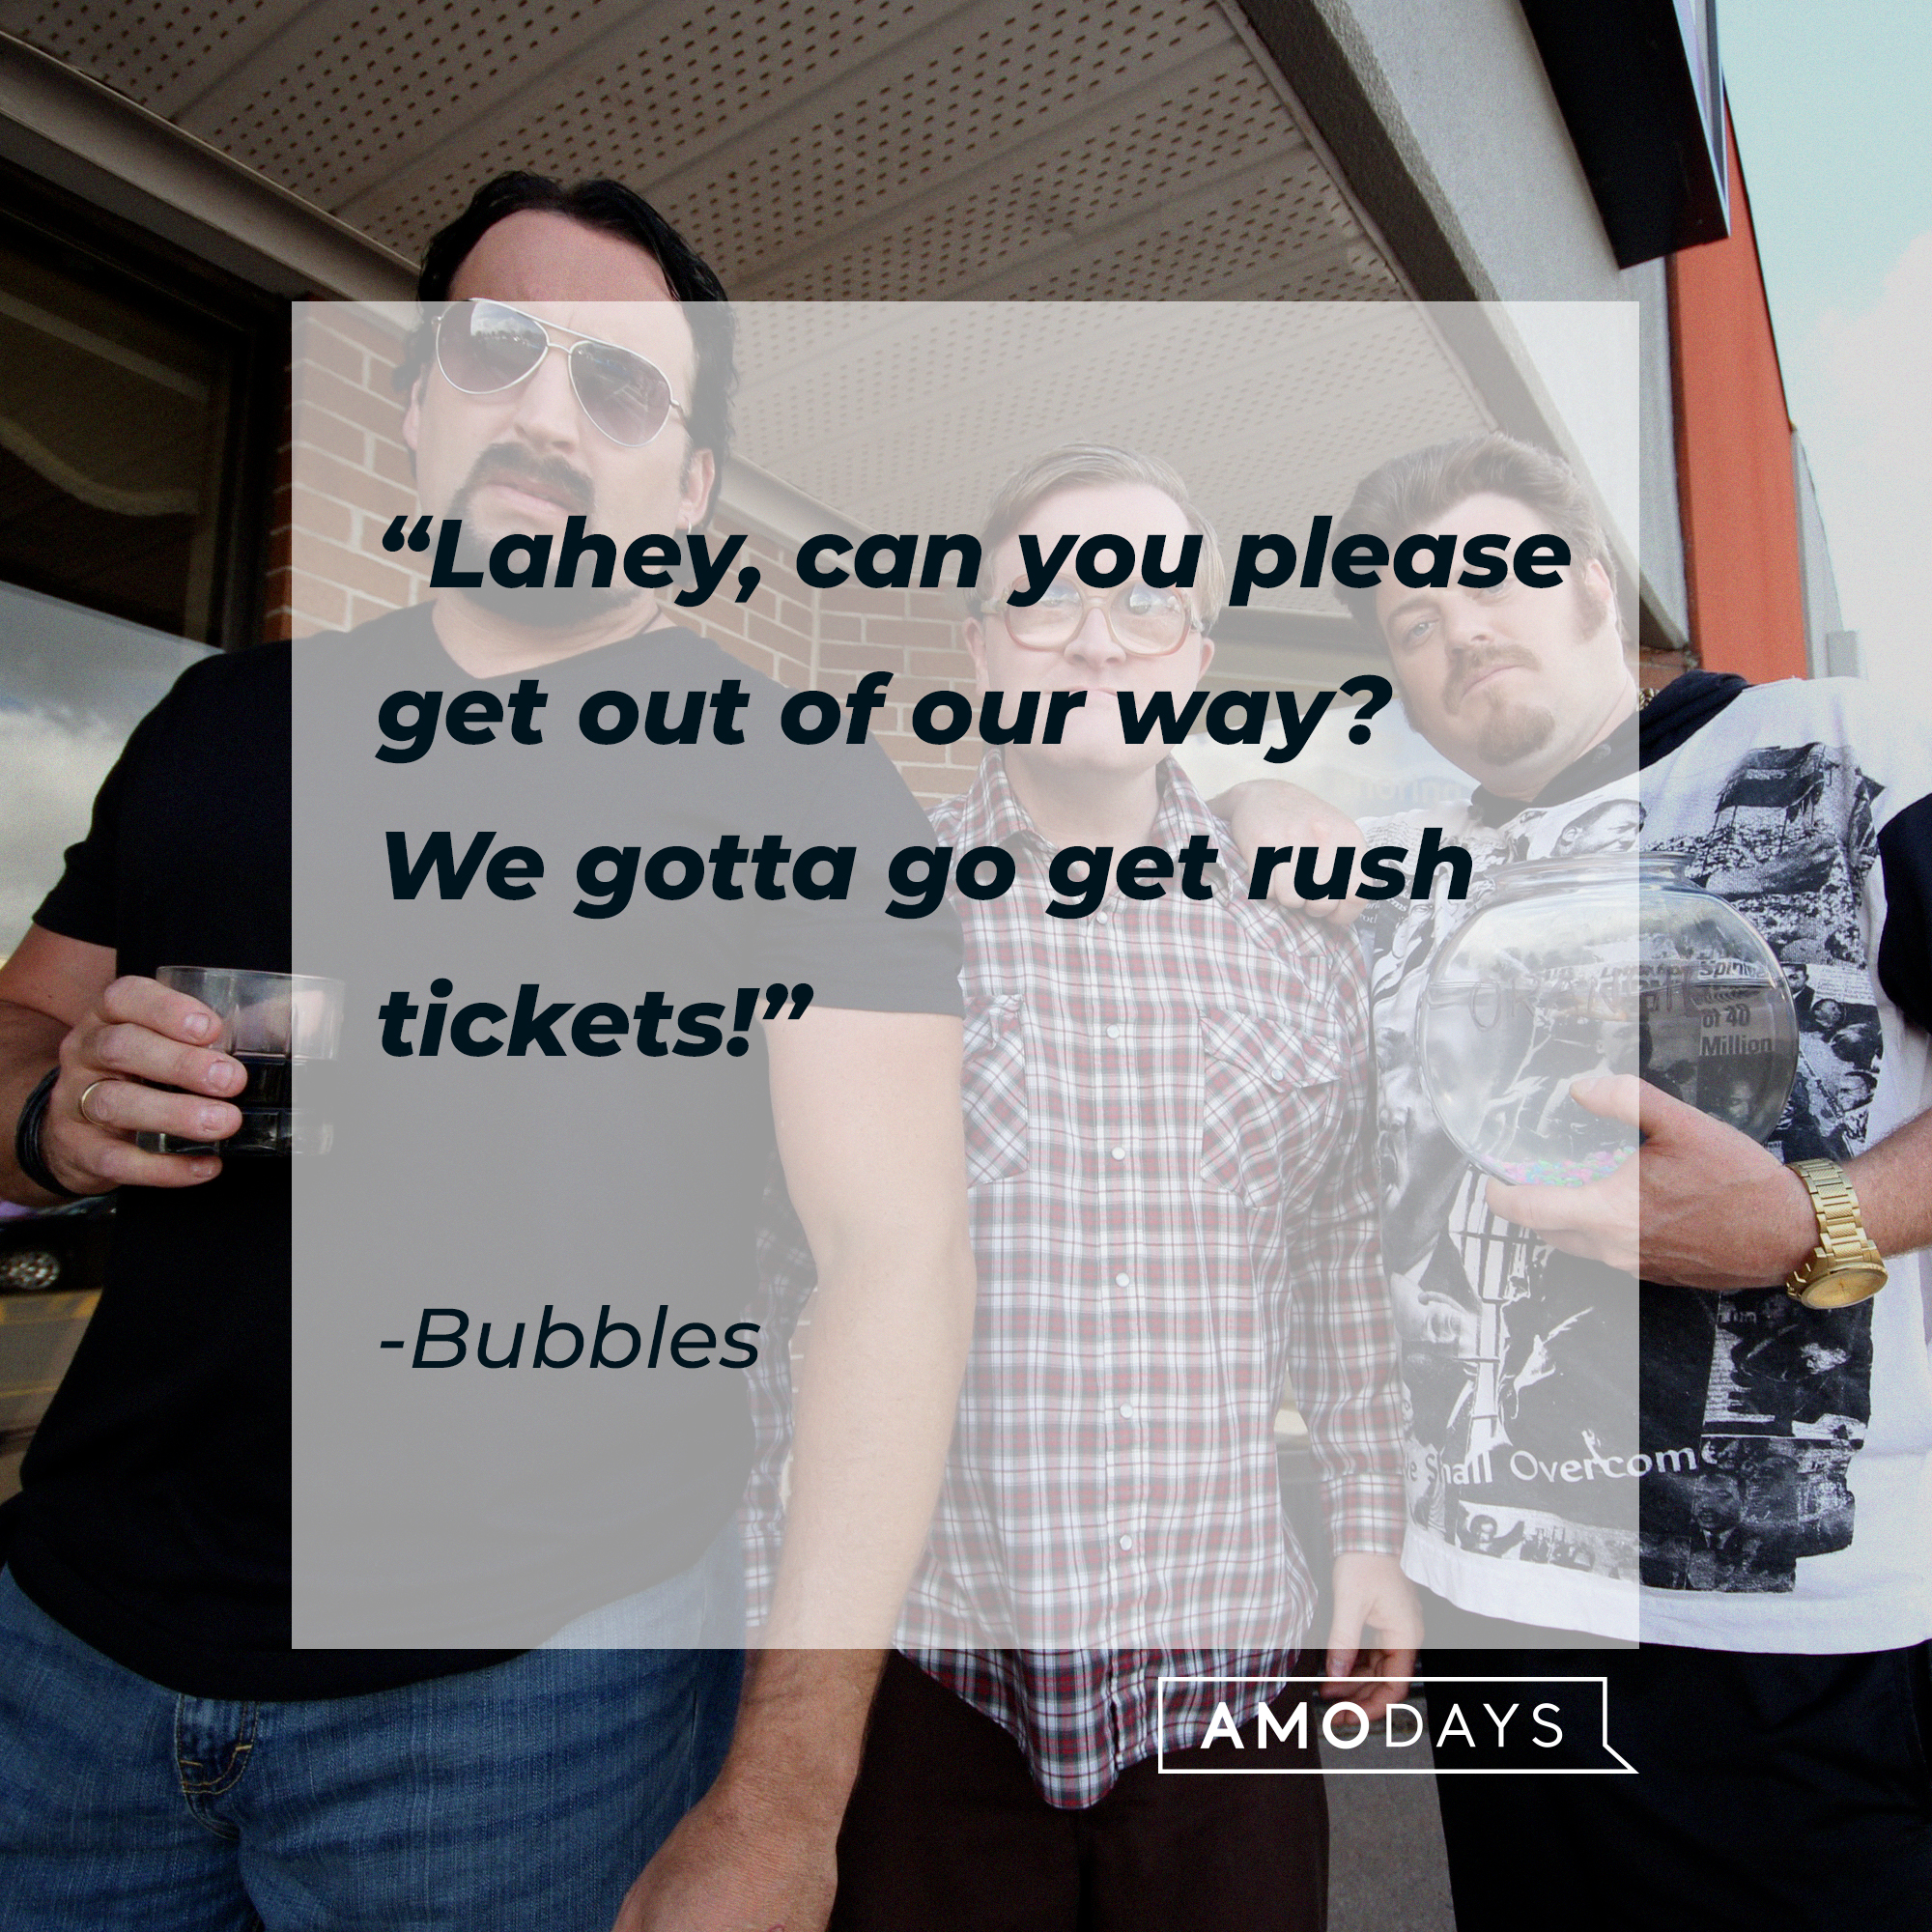 Bubbles's quote: “Lahey, can you please get out of our way? We gotta go get rush tickets!” | Source: facebook.com/trailerparkboys